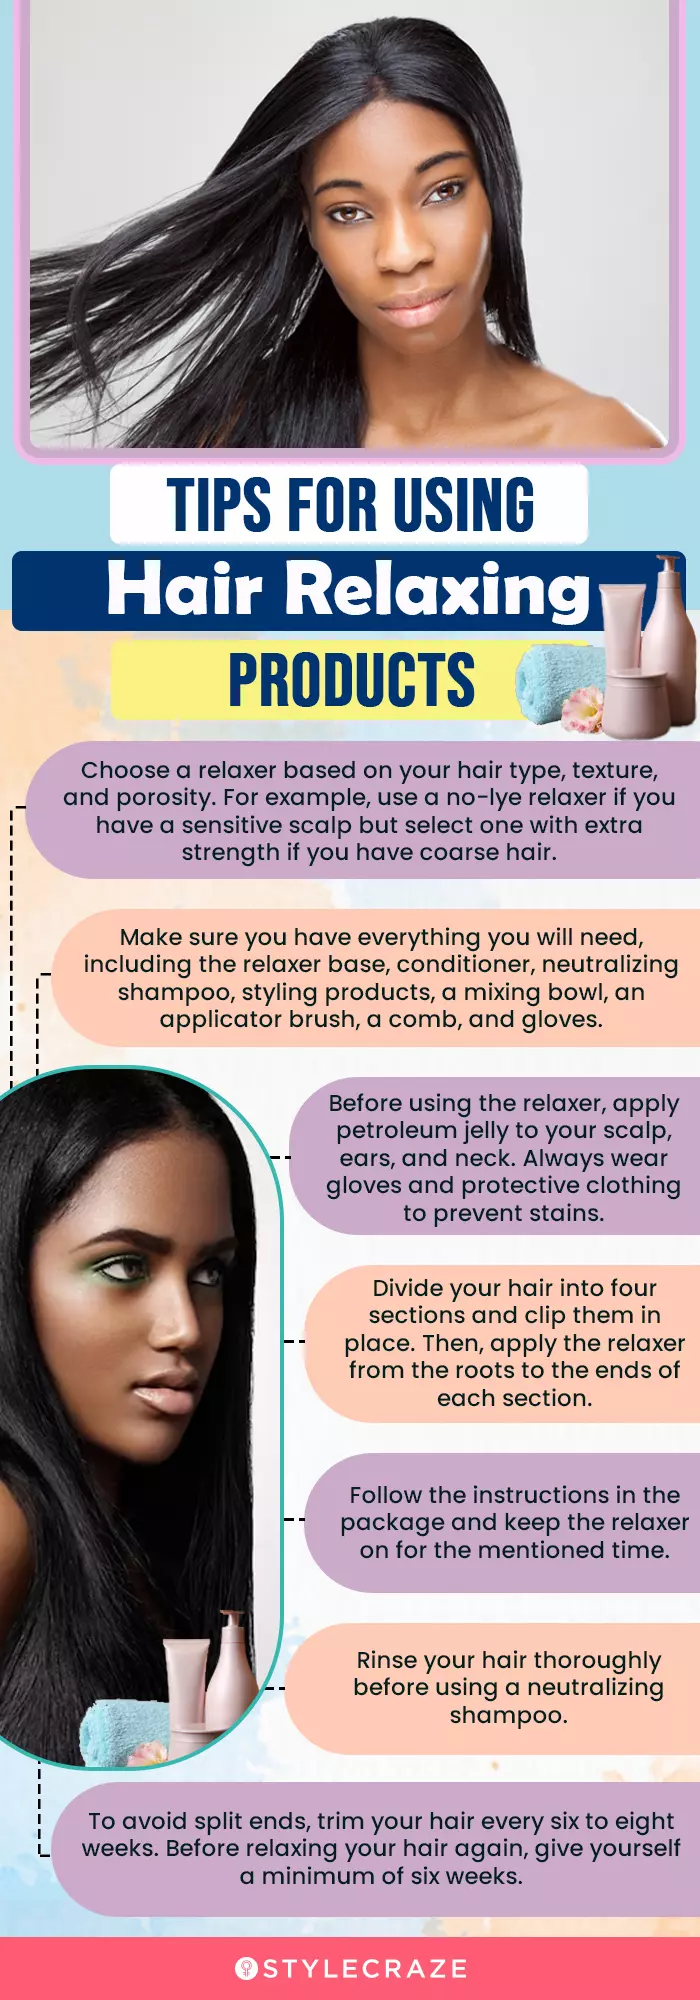 Tips For Using Hair Relaxing Products (infographic)